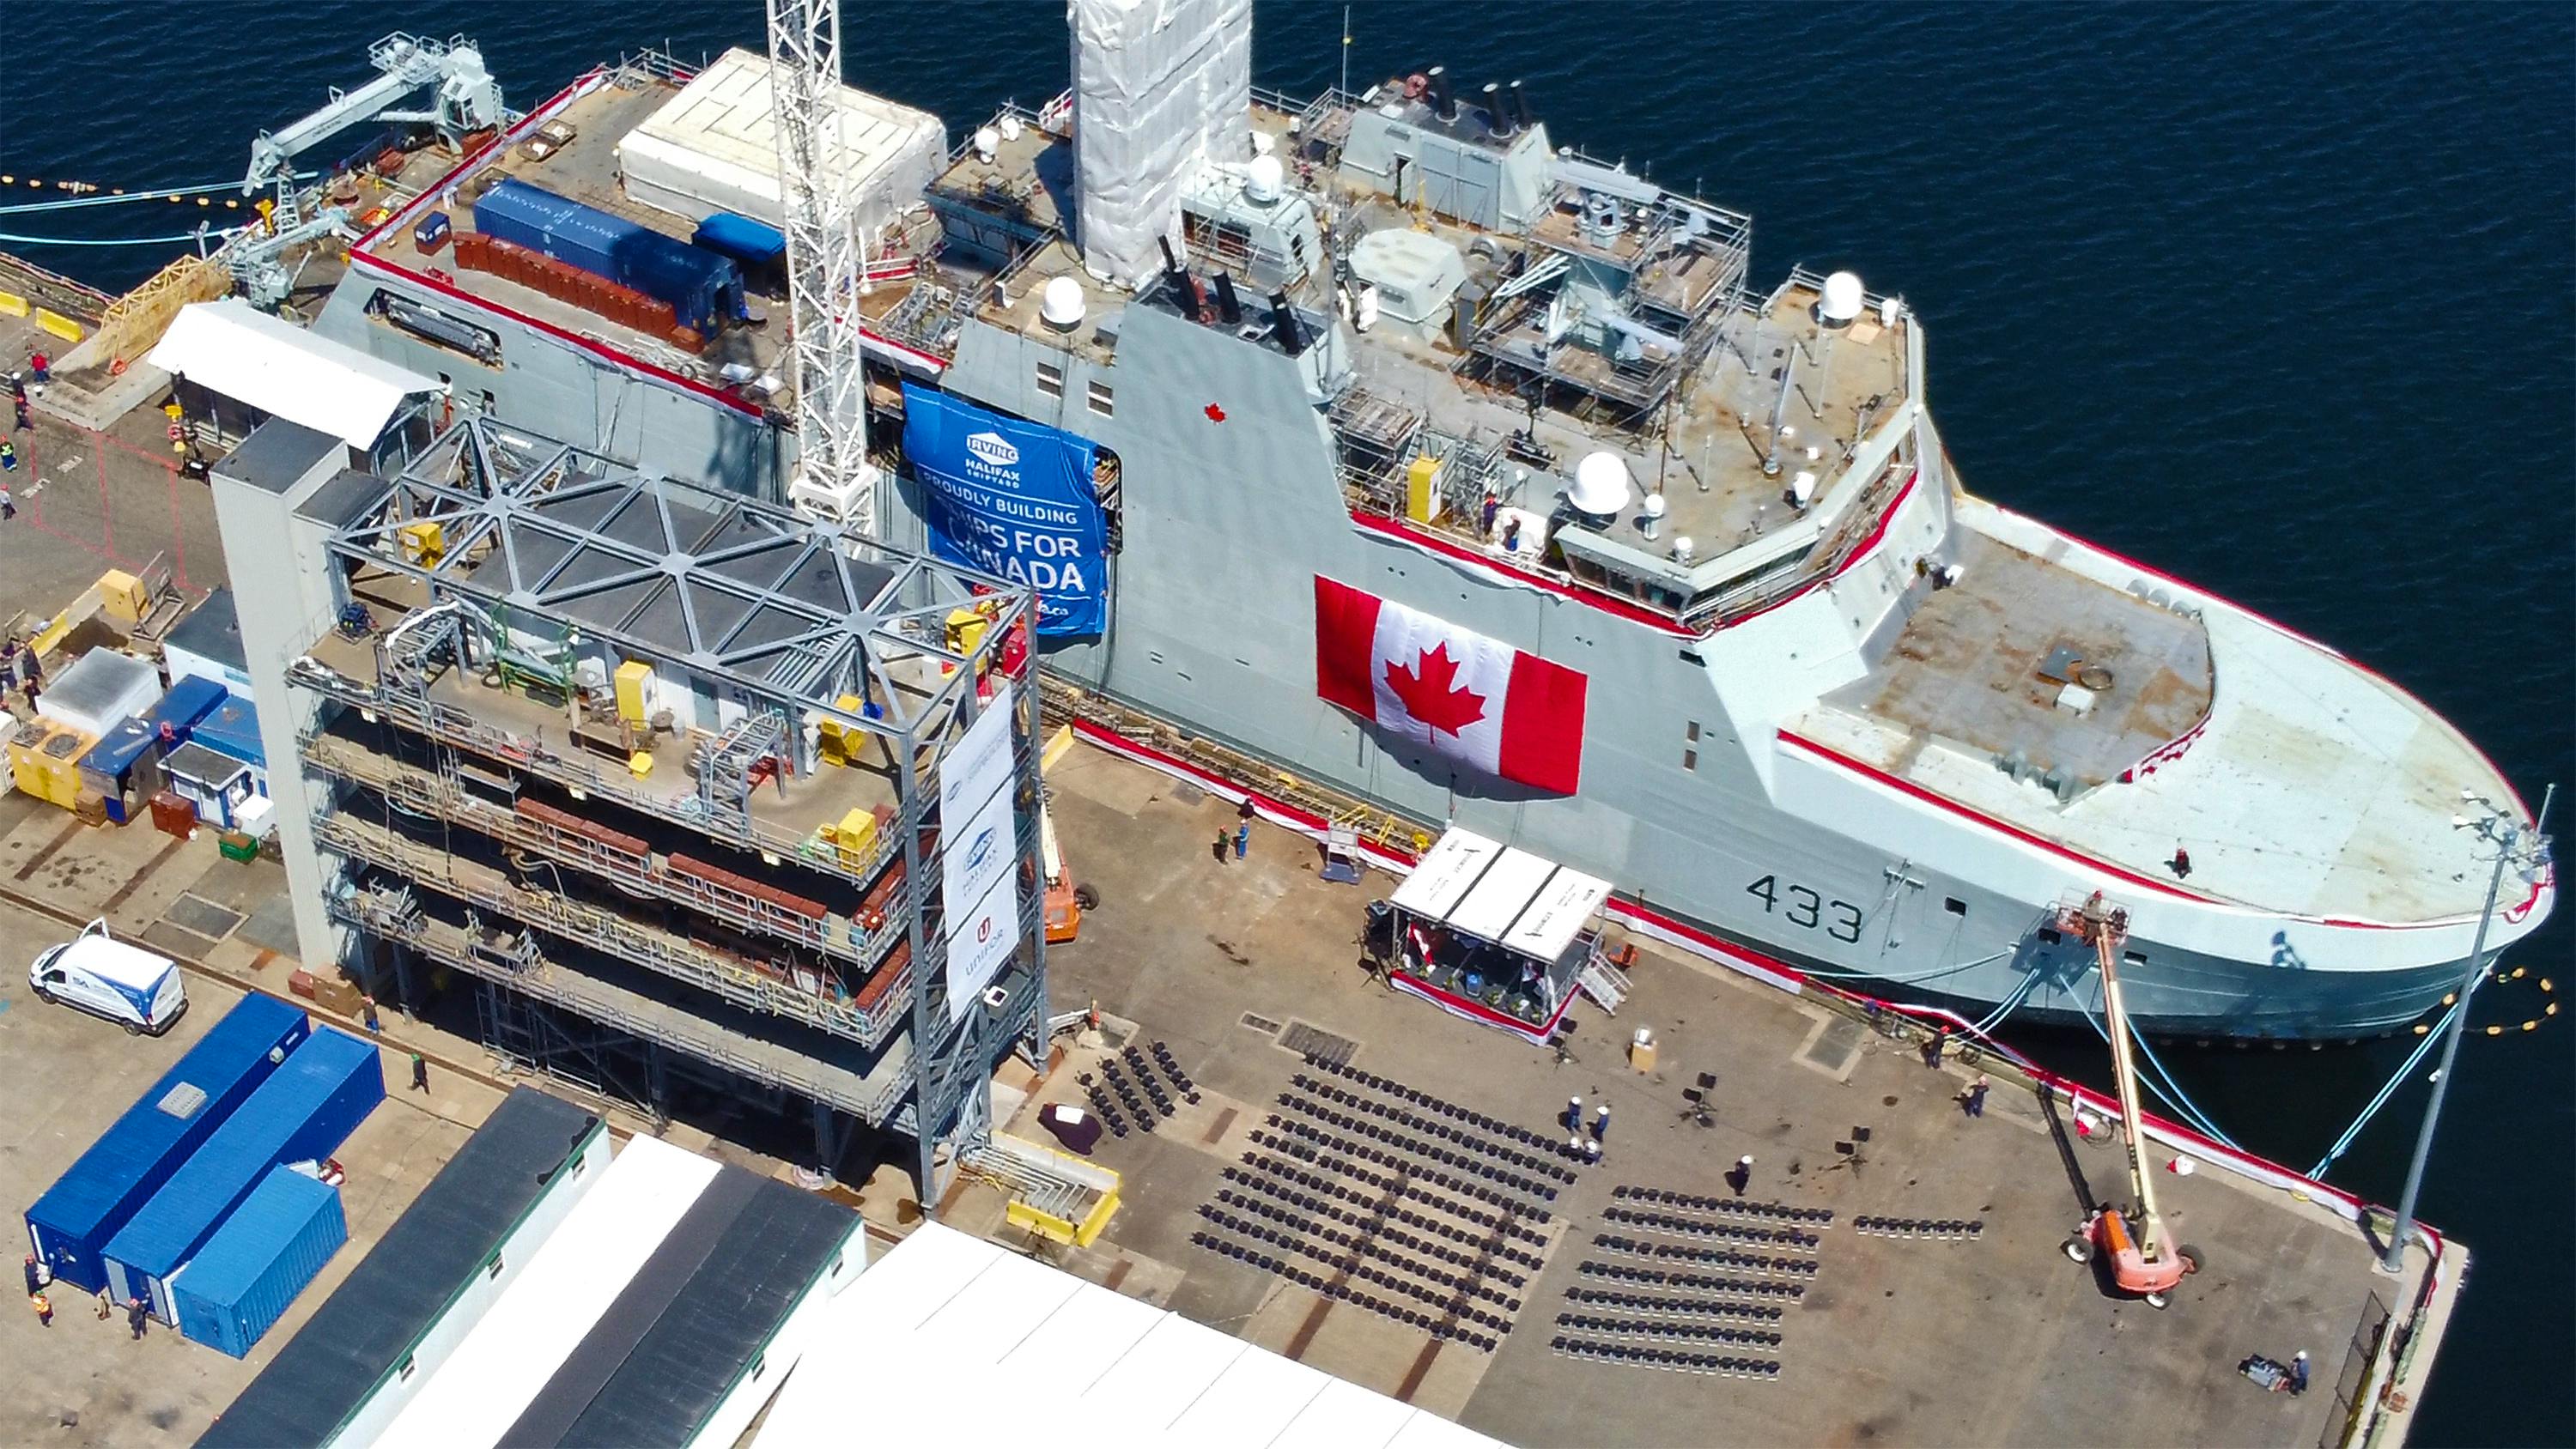 Latest Arctic and Offshore Patrol Vessel built in Nova Scotia officially  named HMCS William Hall | SaltWire